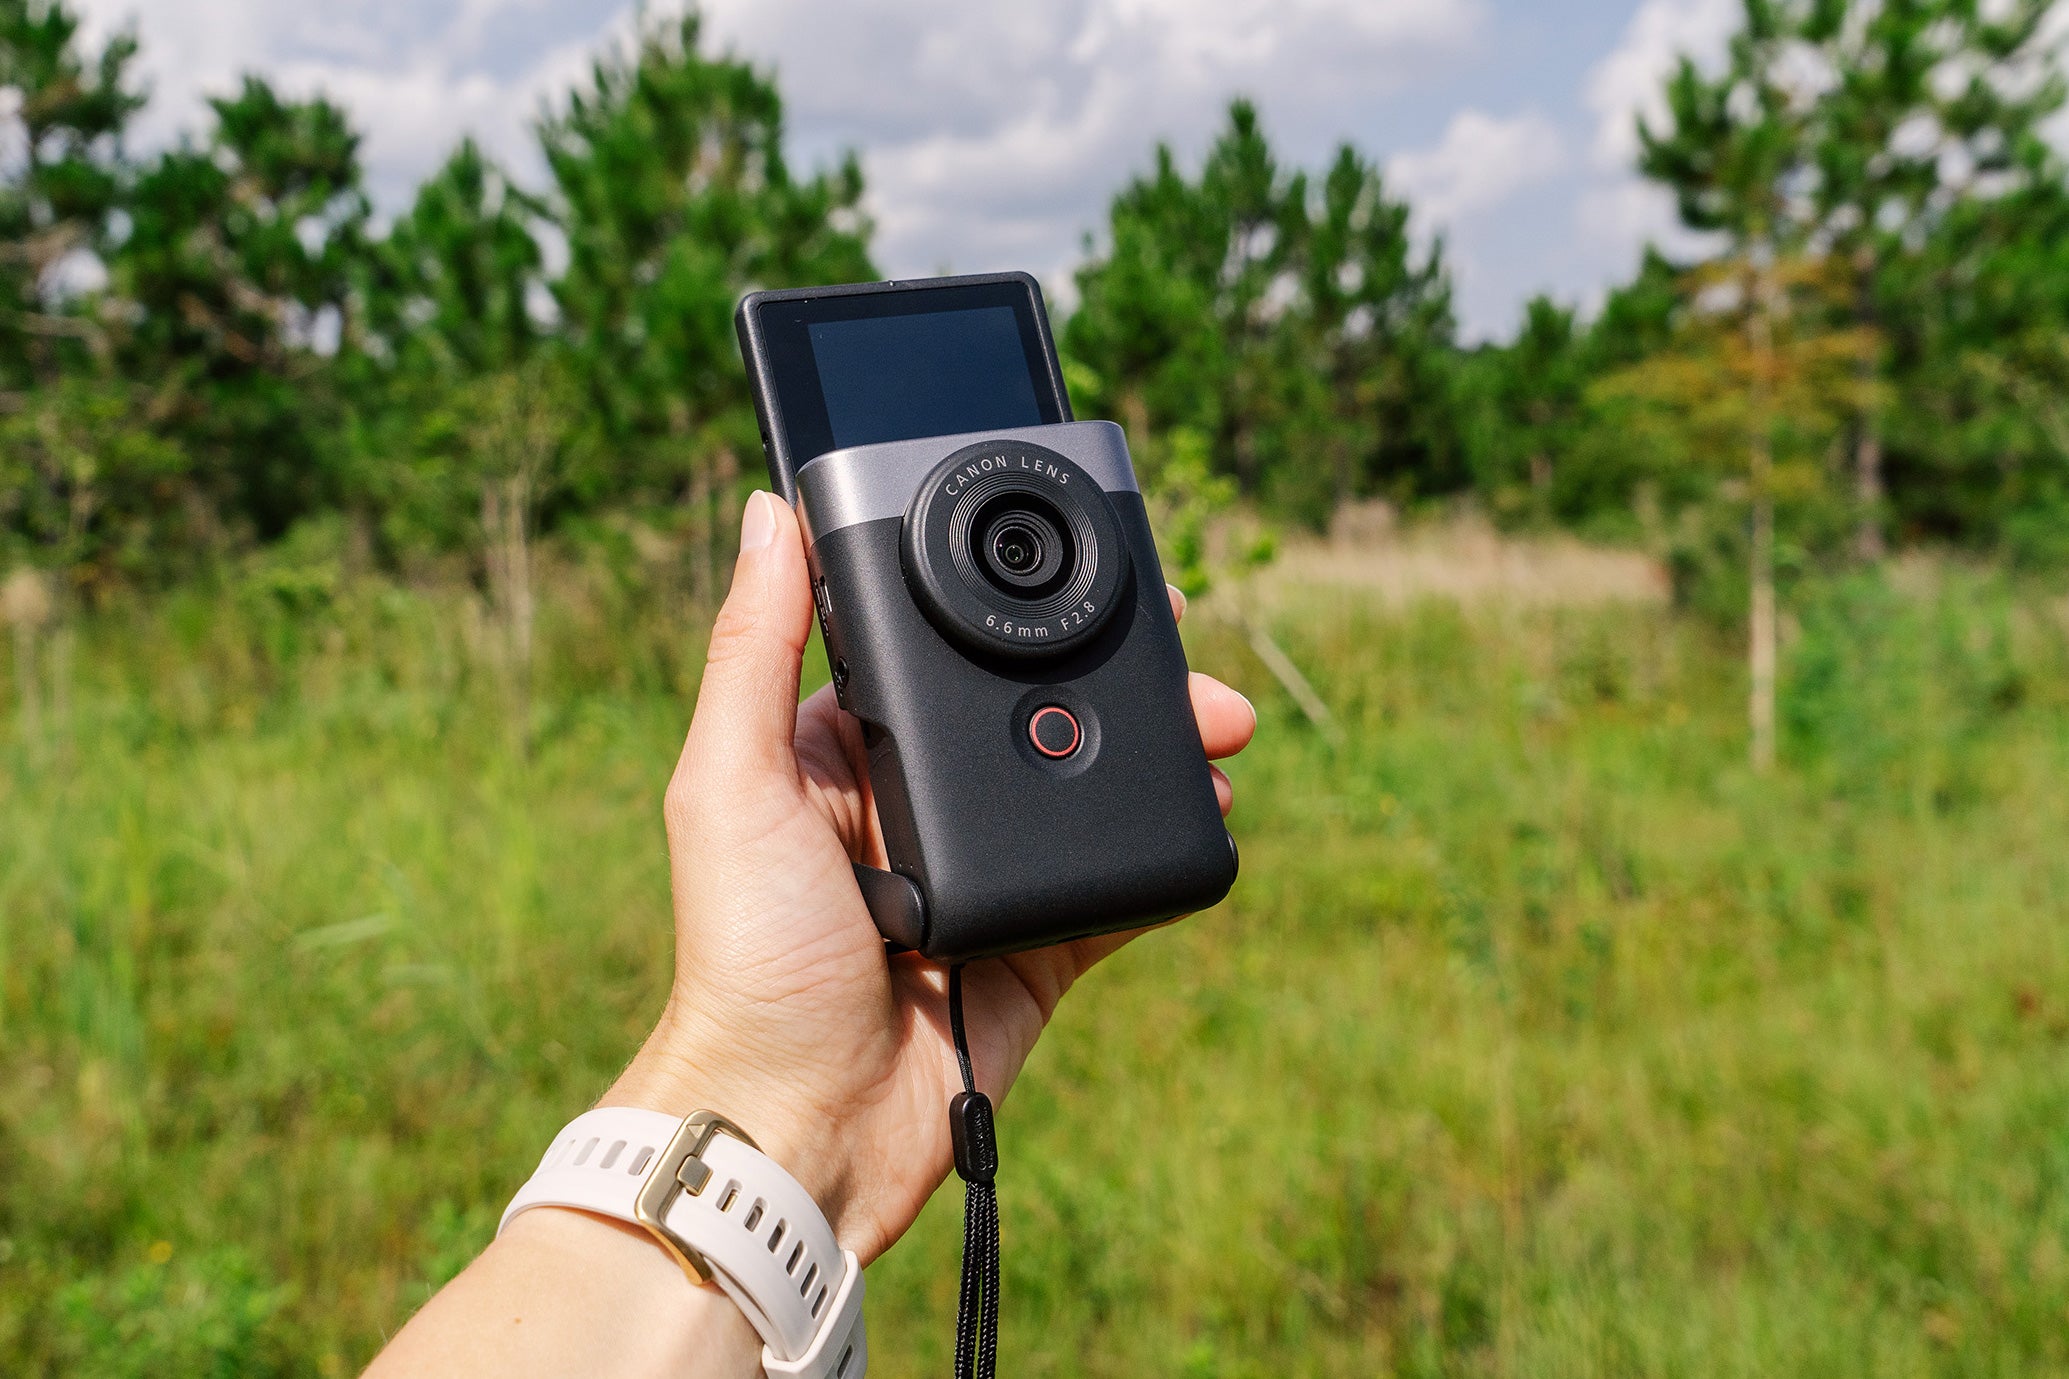 Canon PowerShot V10 vlogging camera in a hand held against a forest background